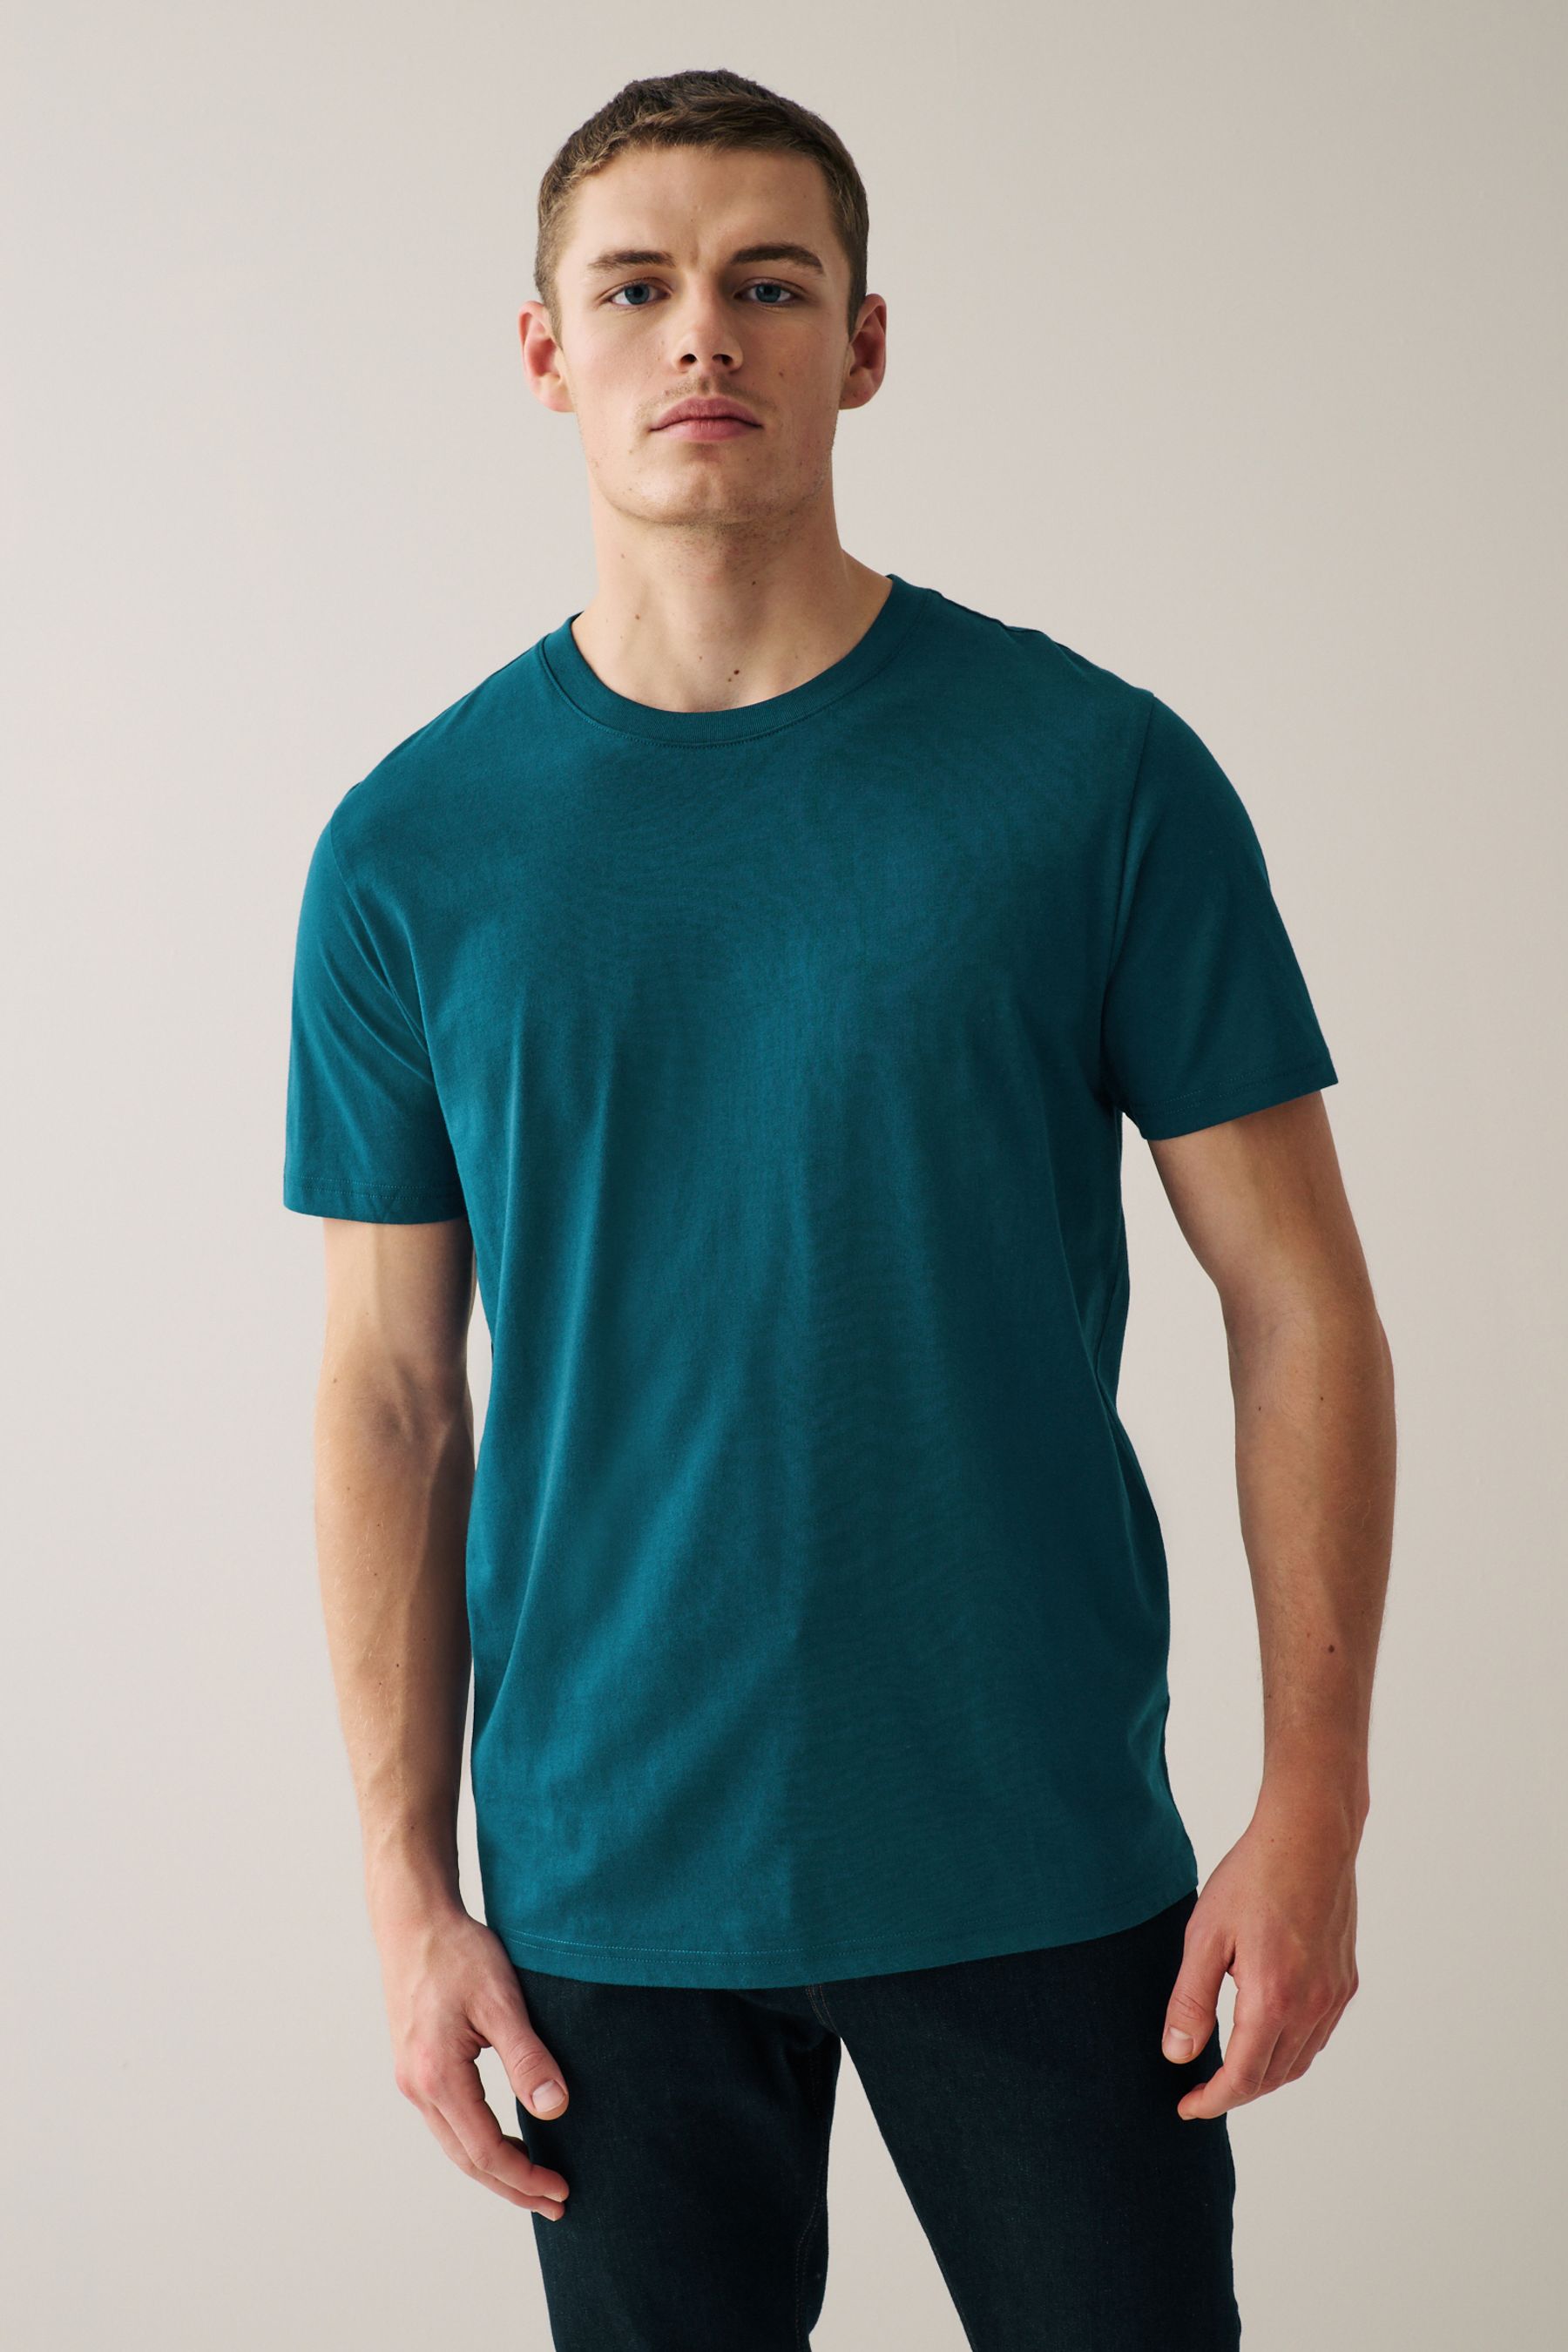 Buy Navy/ Teal/ White/ Black/ Green/ Burgundy T-Shirts 6 Pack from the ...